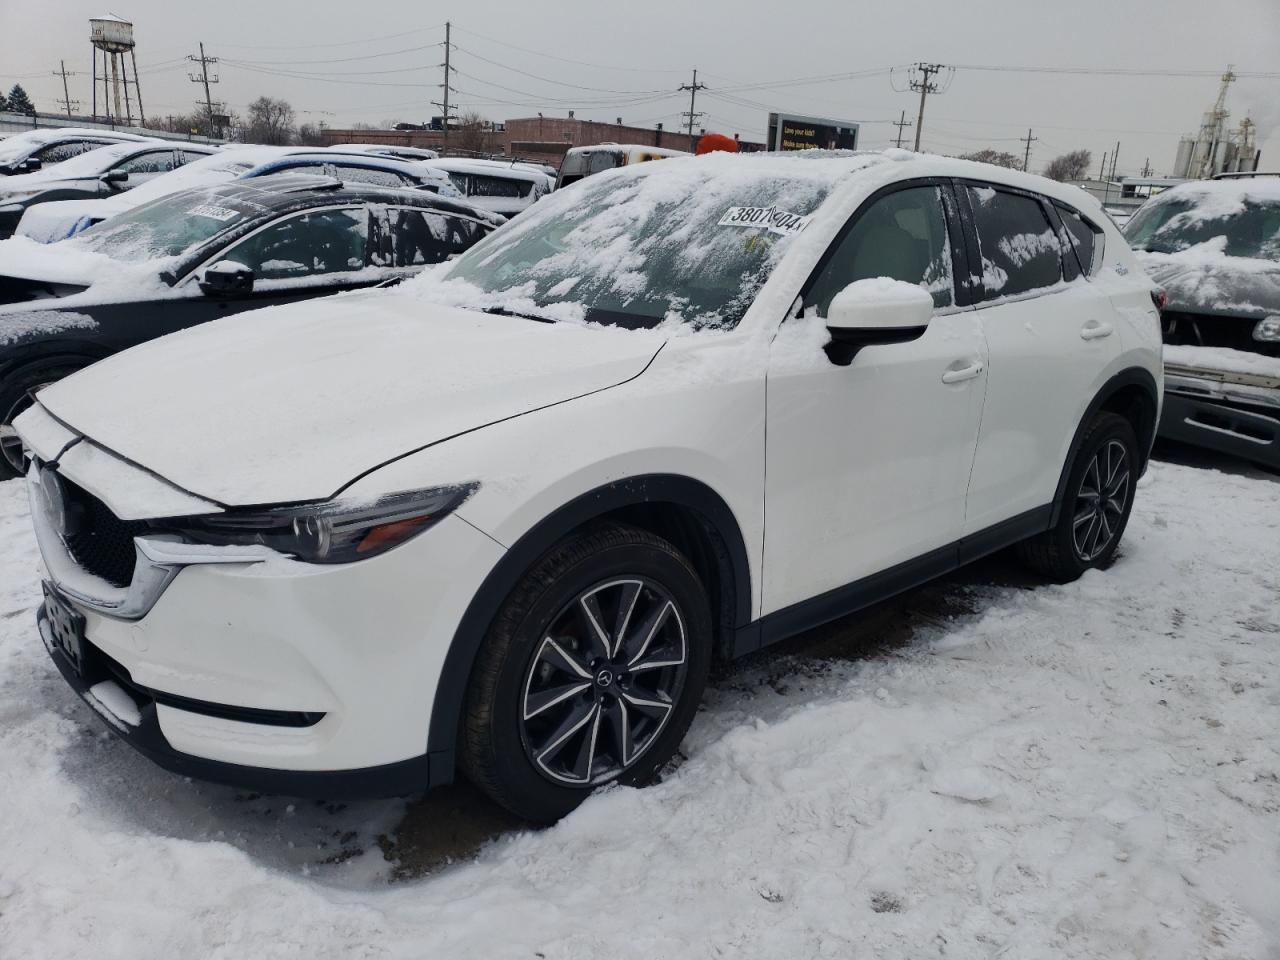 2017 Mazda CX-5 at IL - Chicago Heights, Copart lot 38070904 